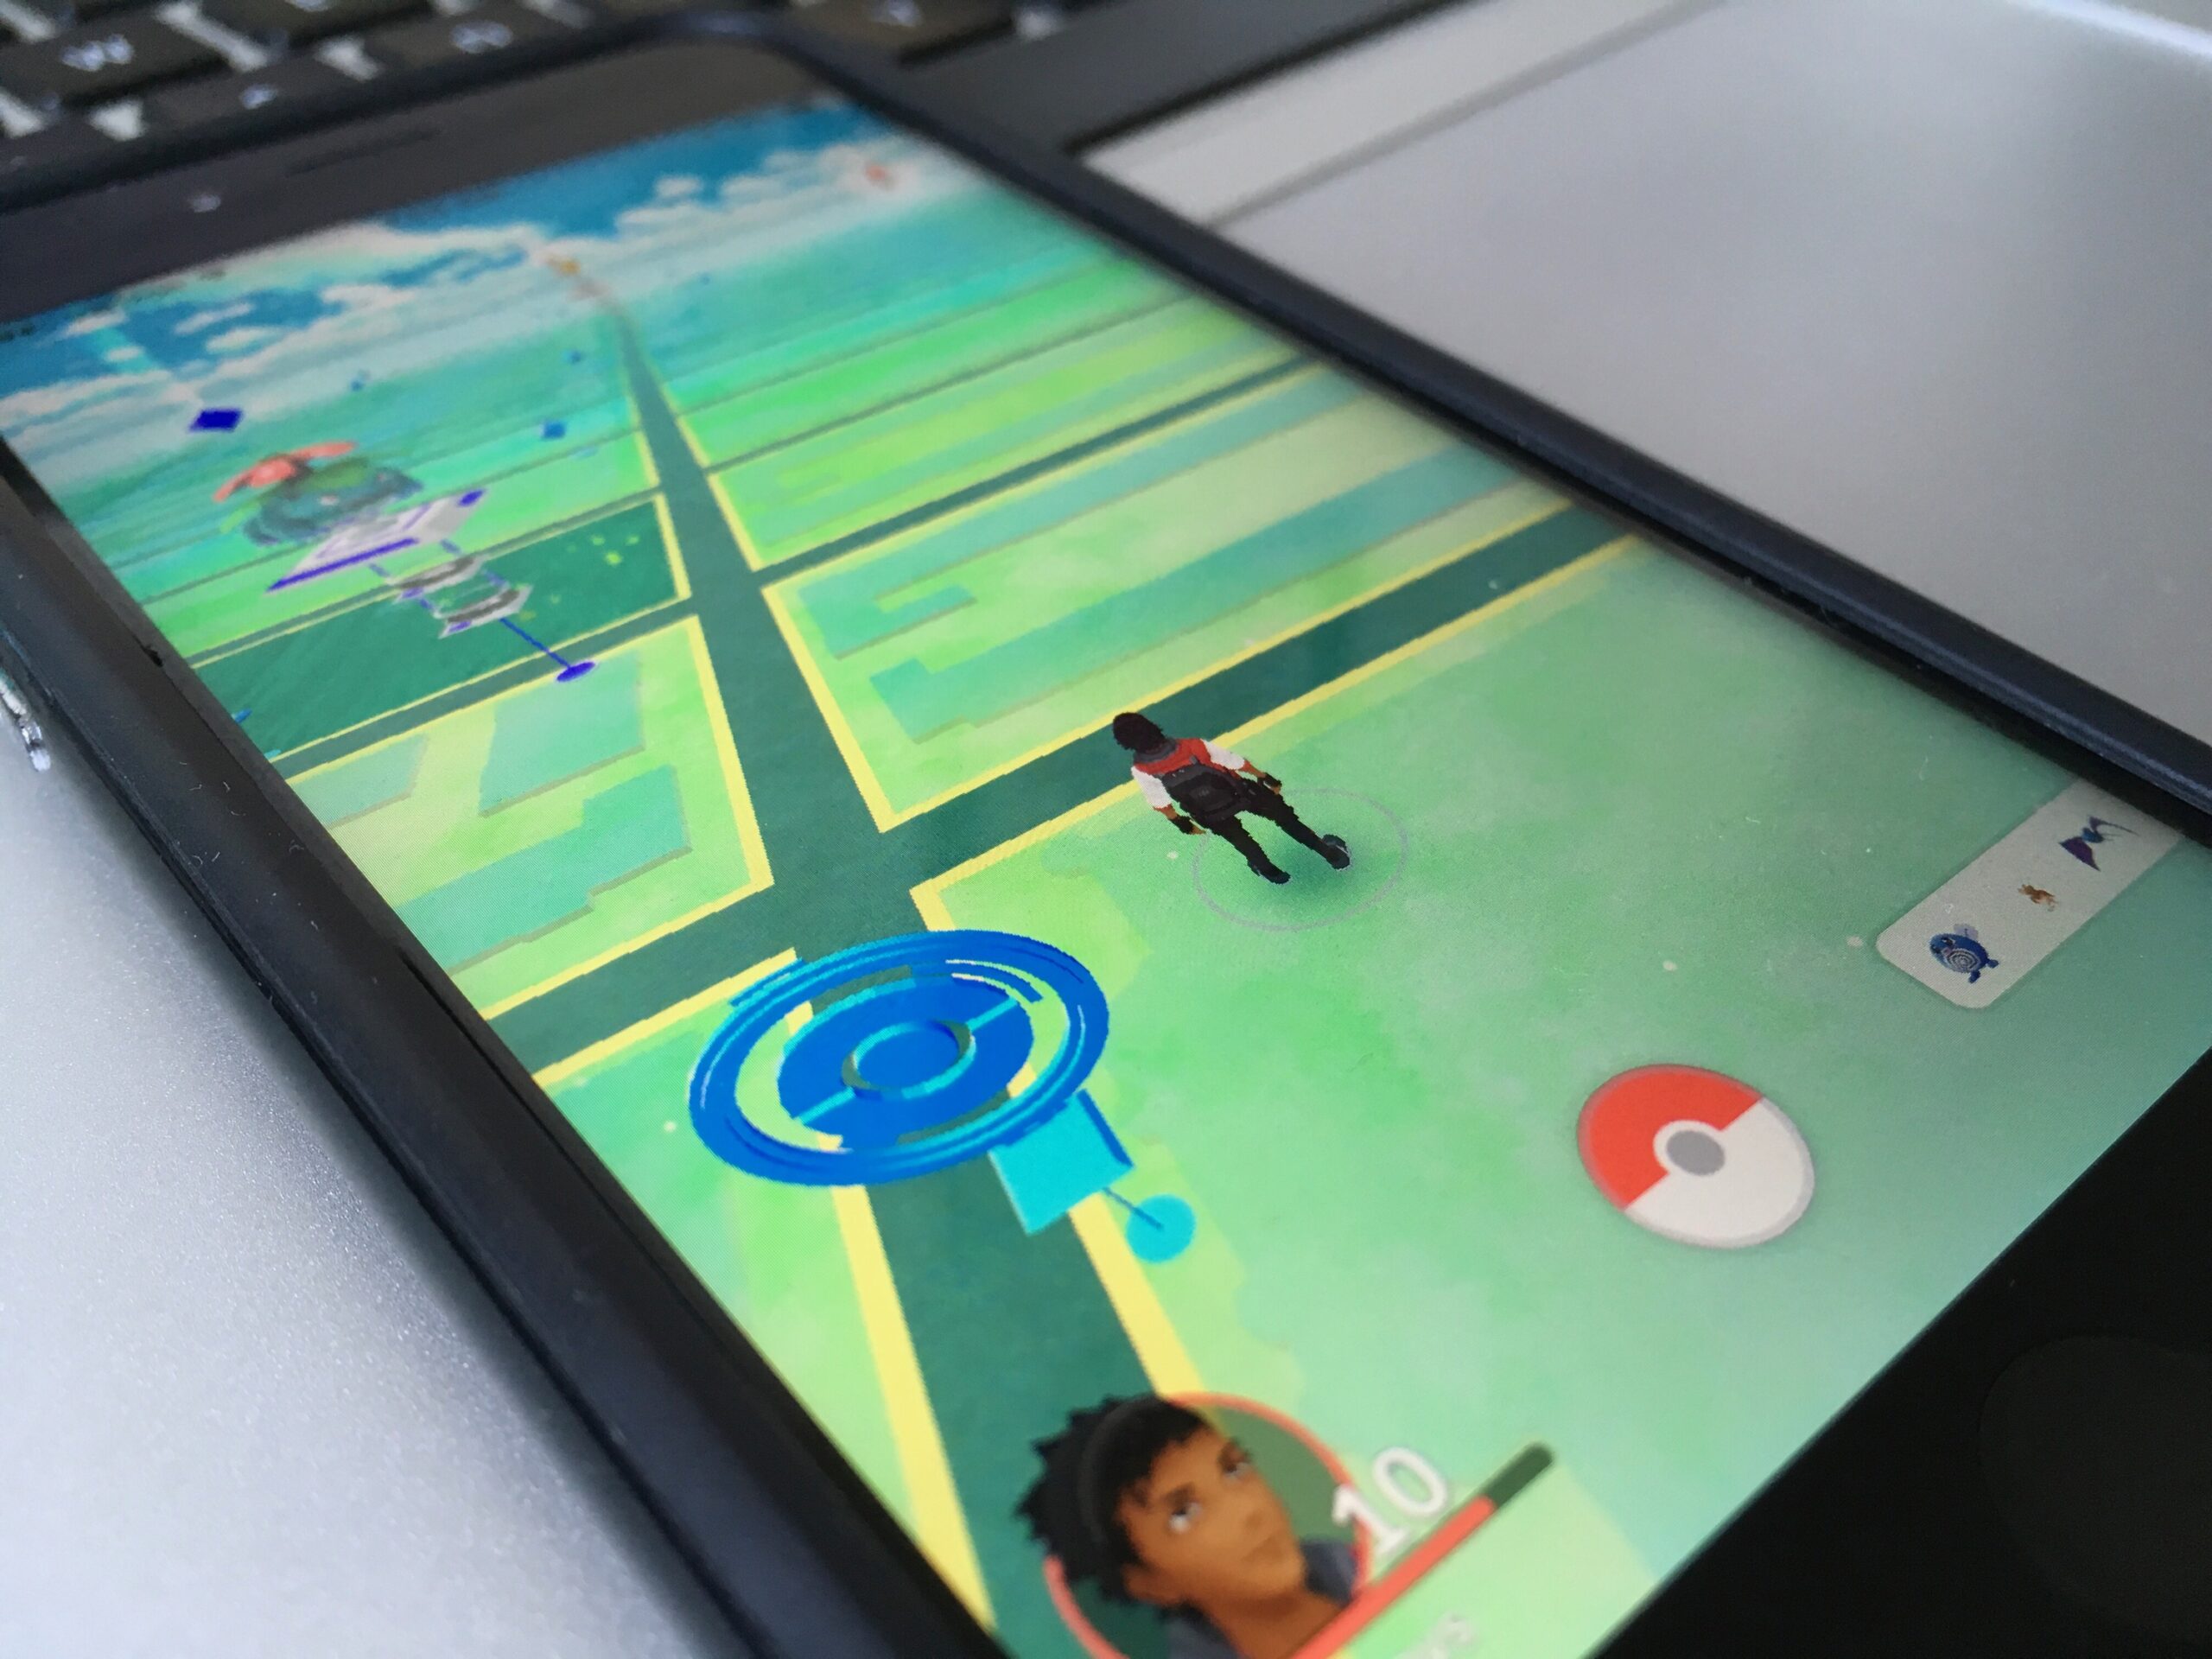 The First Pokémon Go Update Has Been Released